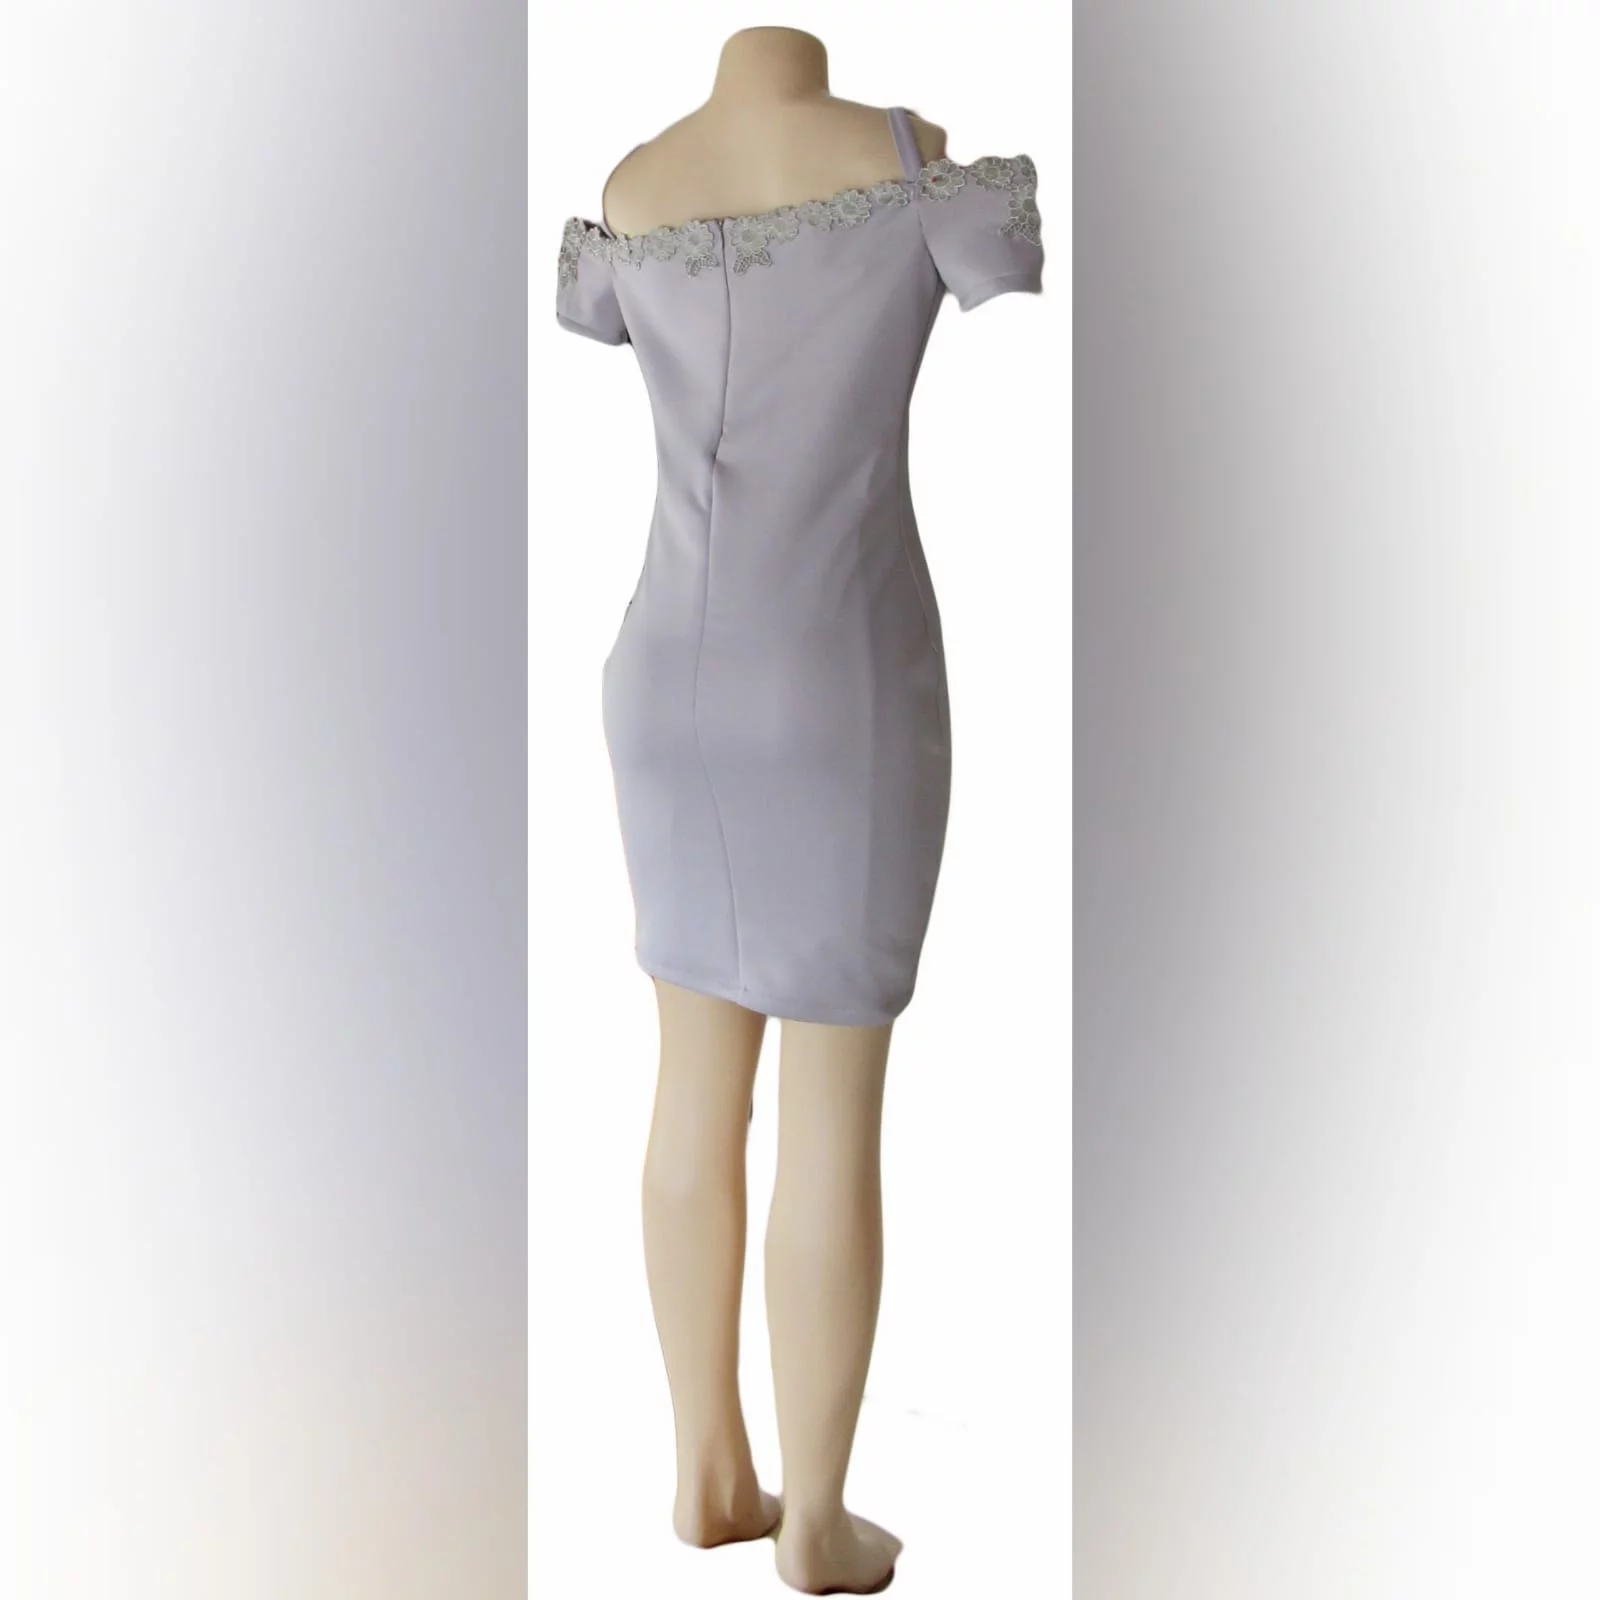 Light grey short fitted smart casual dress 6 light grey short fitted smart casual dress, with off shoulder shorter sleeves and shoulder straps. Neckline detailed with silver lace.